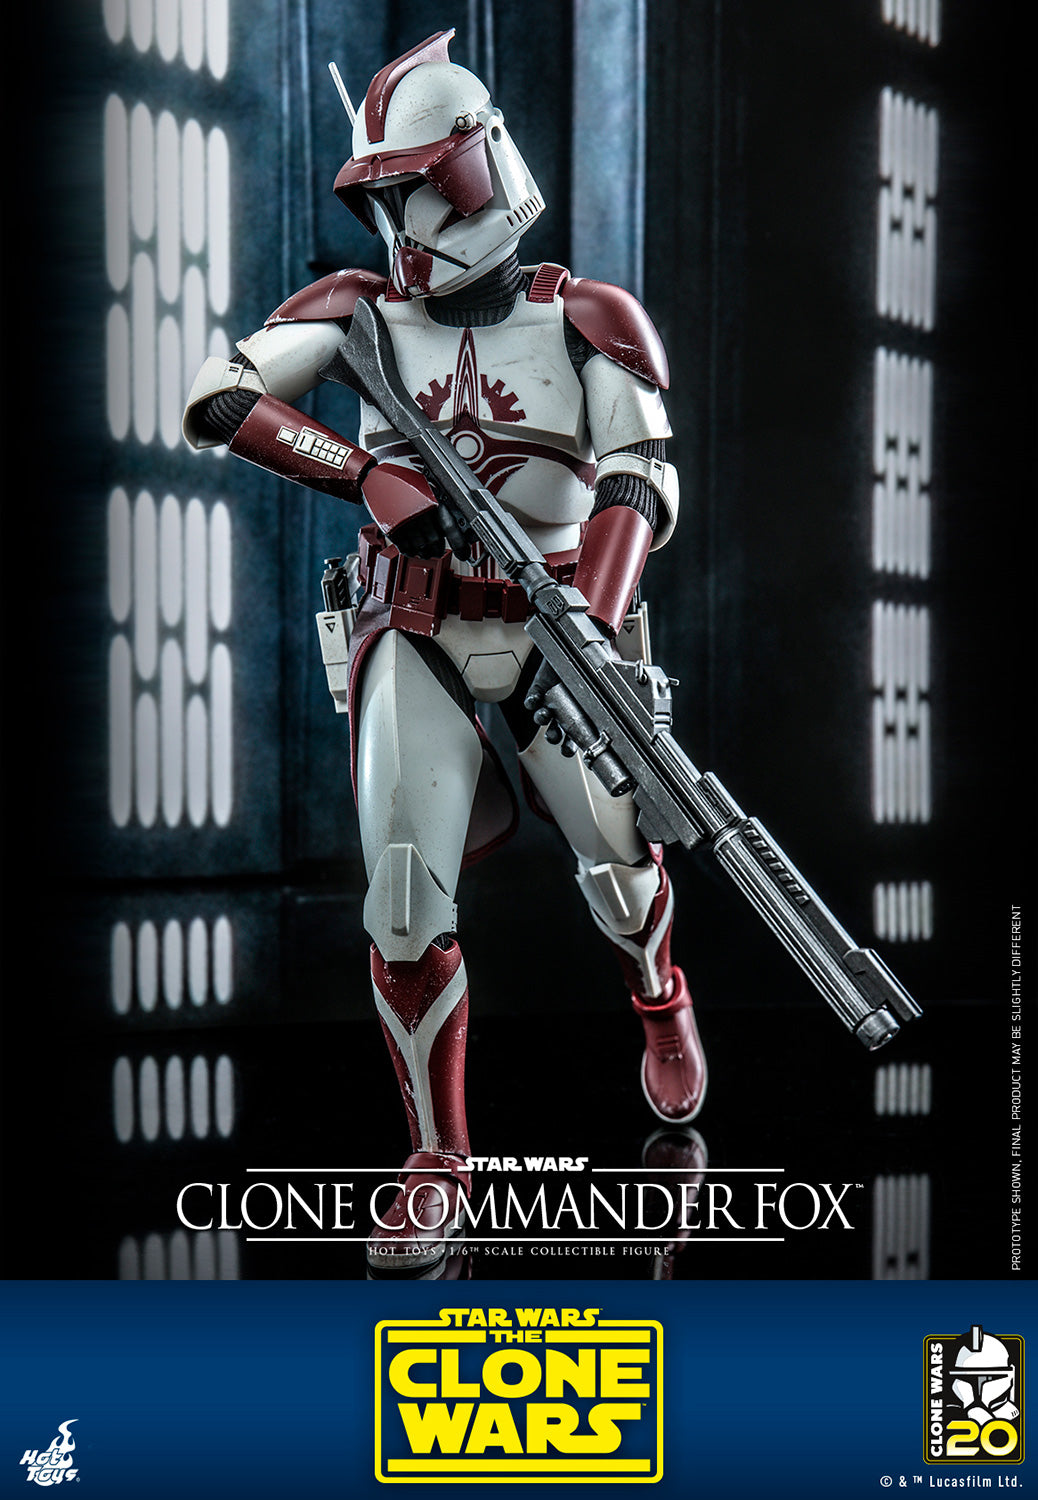 Clone Commnder Fox 1/6 Scale Figure by Hot Toys